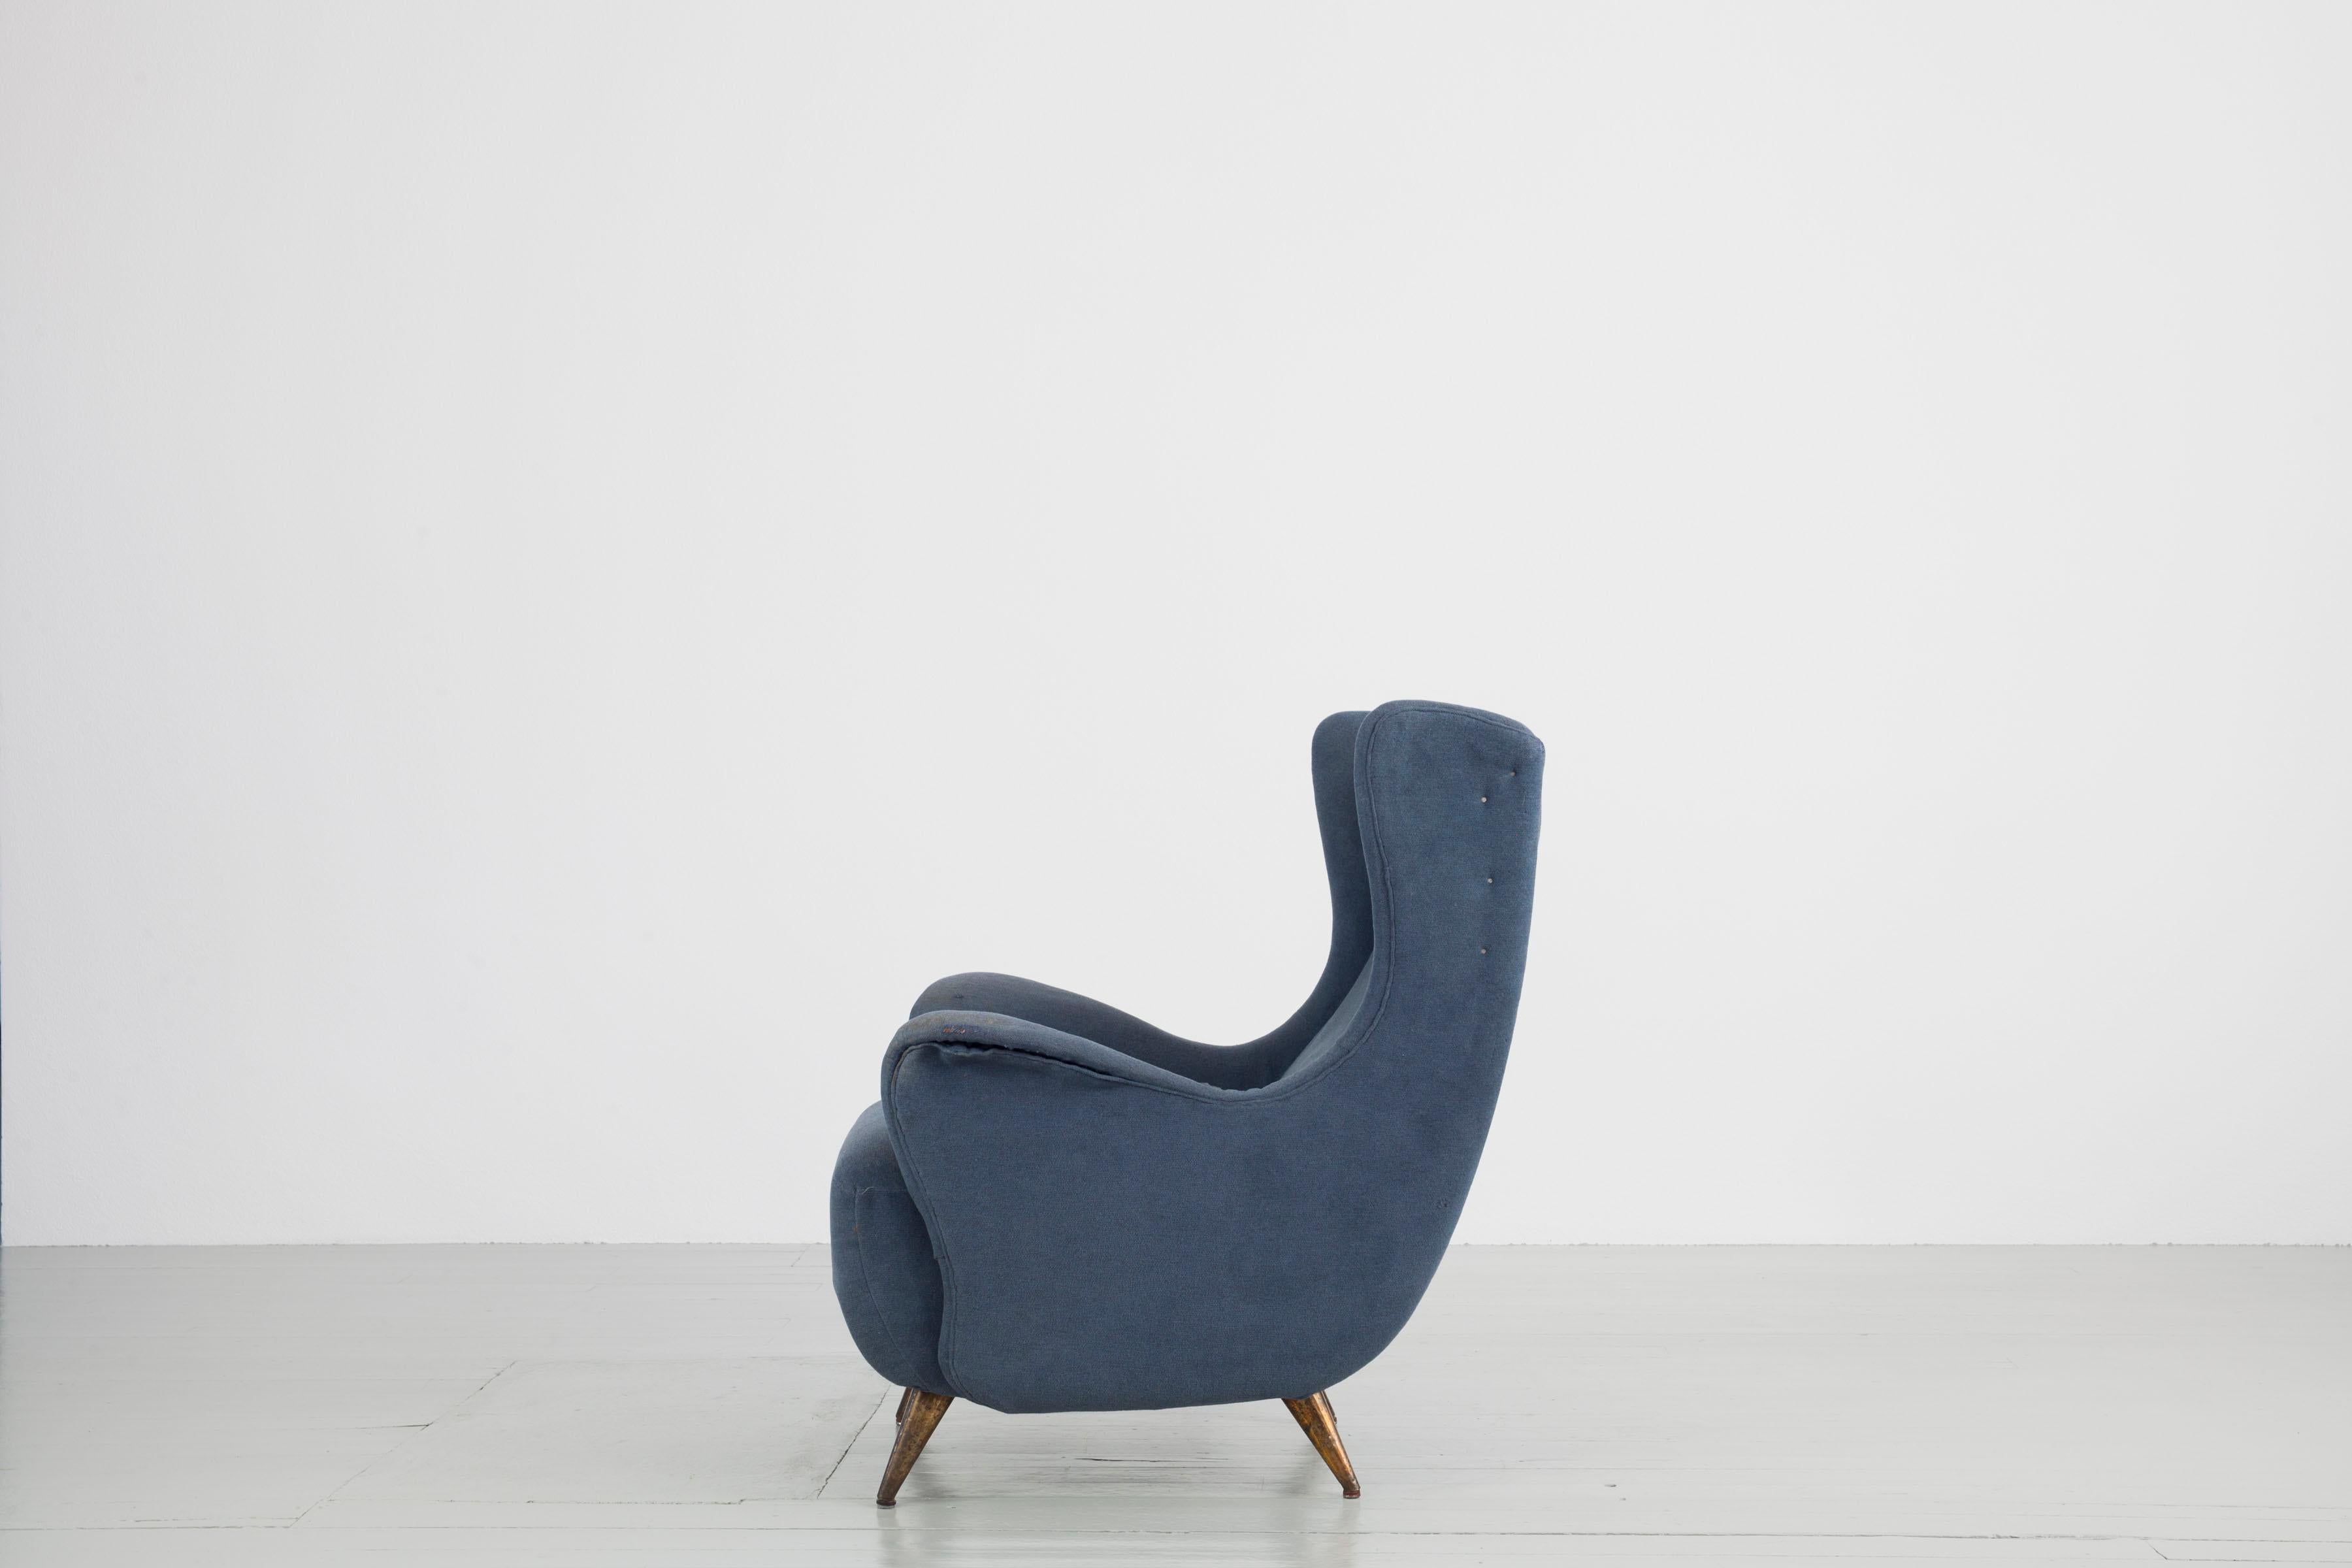 Mid-20th Century Wingback Chair, Design and Manufacturing by I.S.A. Bergamo, Italy, 1950s For Sale